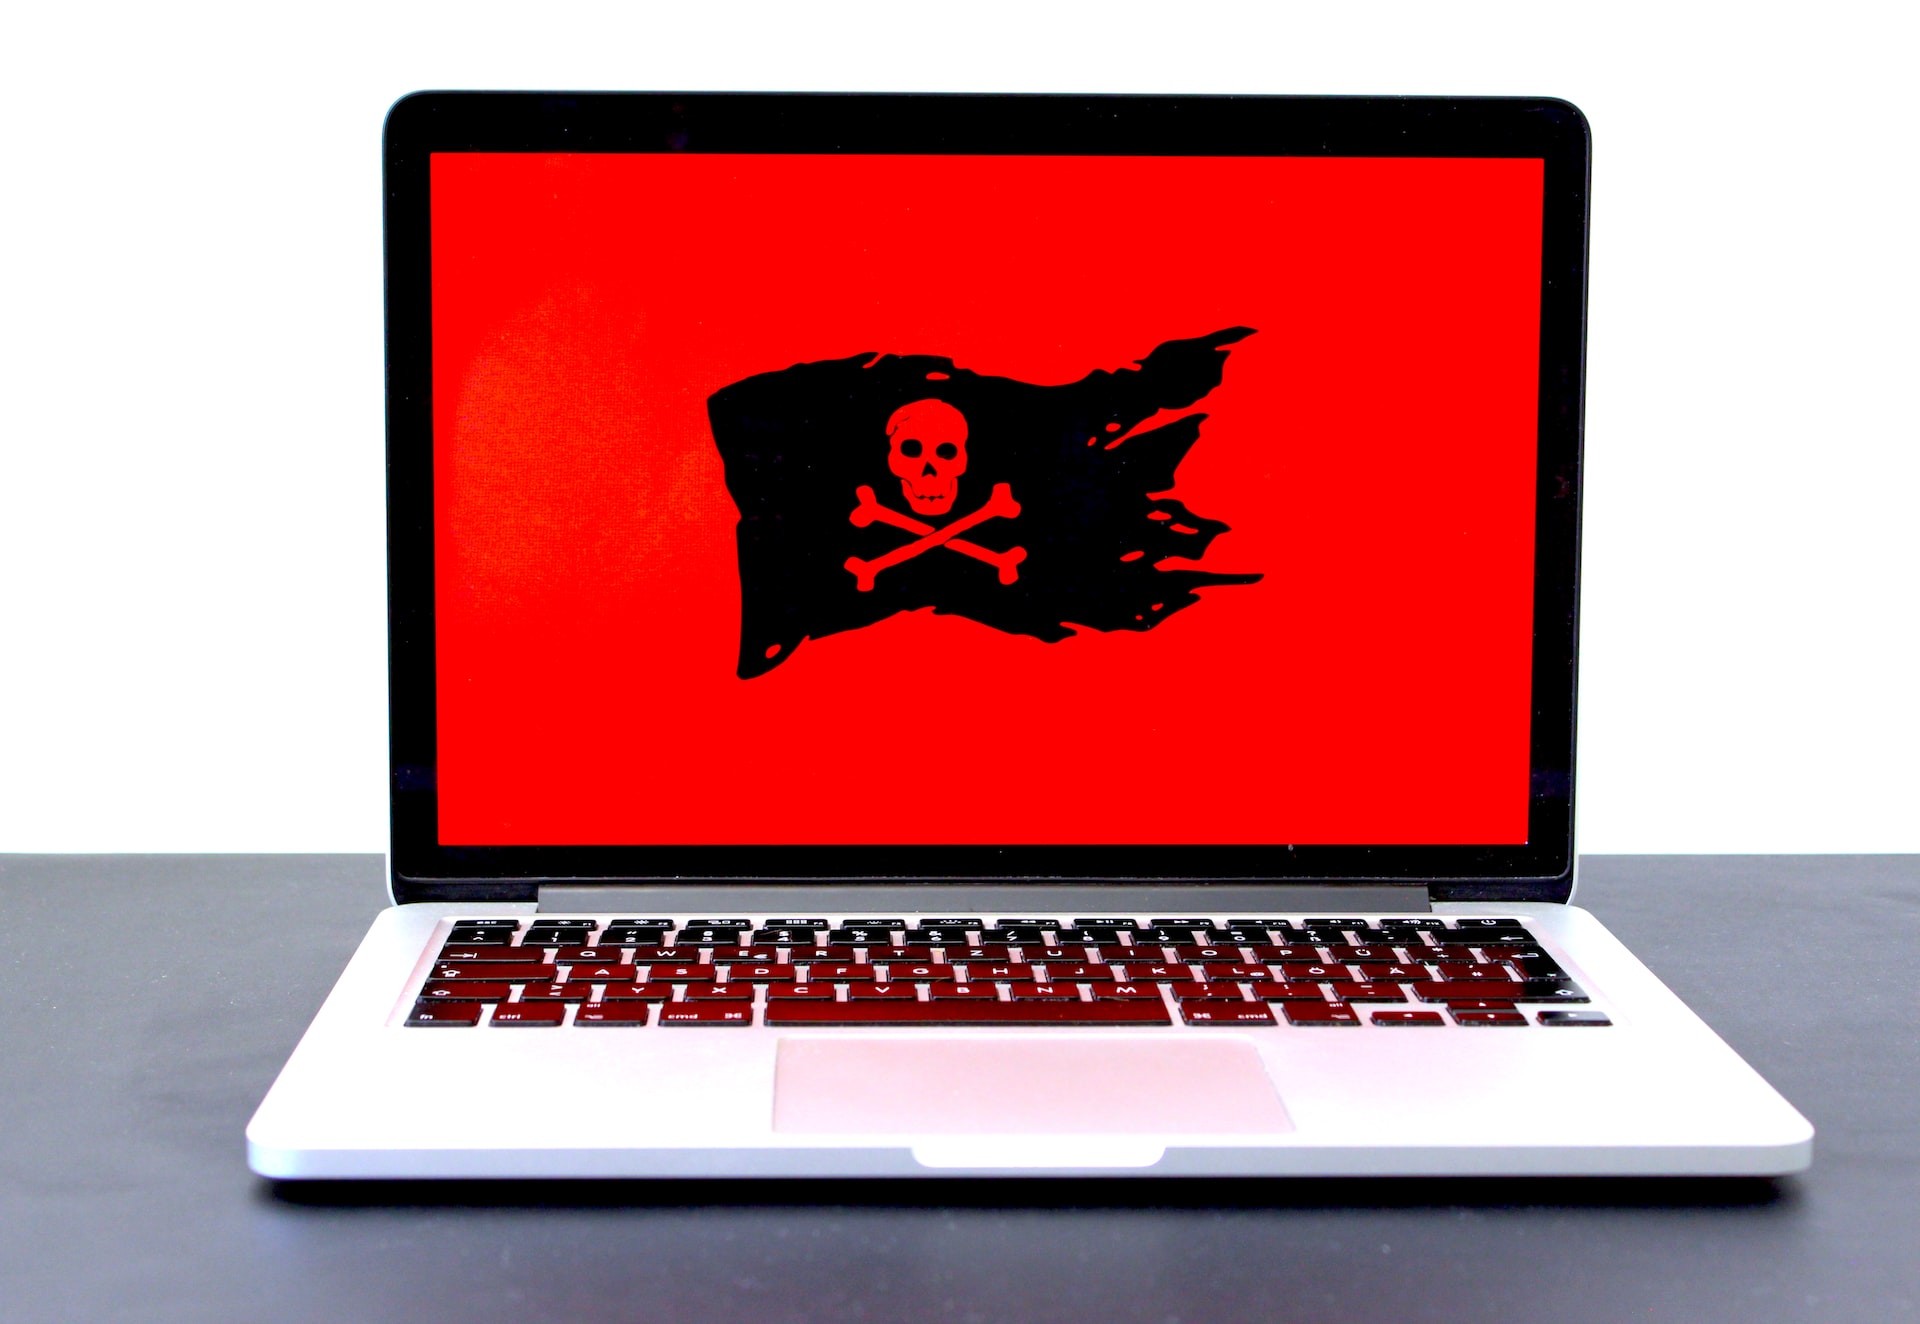 Phishing scam distributes malware-infected Afterburner on fake MSI website
